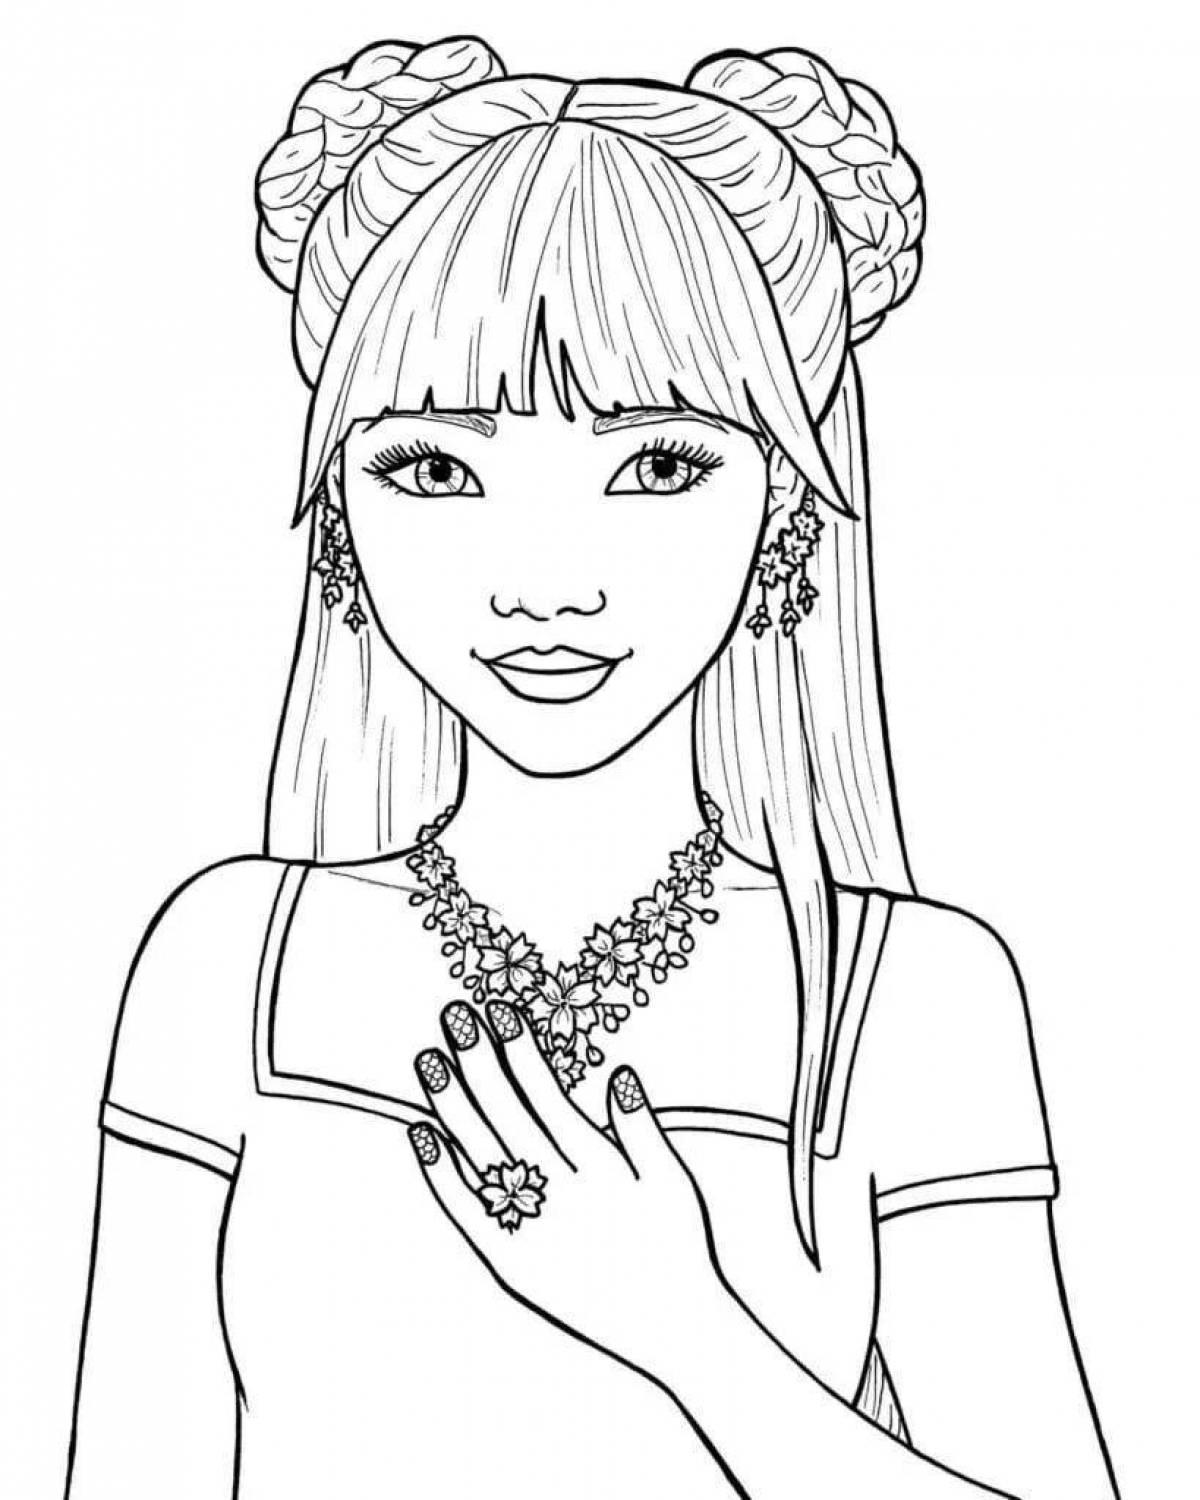 Playful coloring book for girls